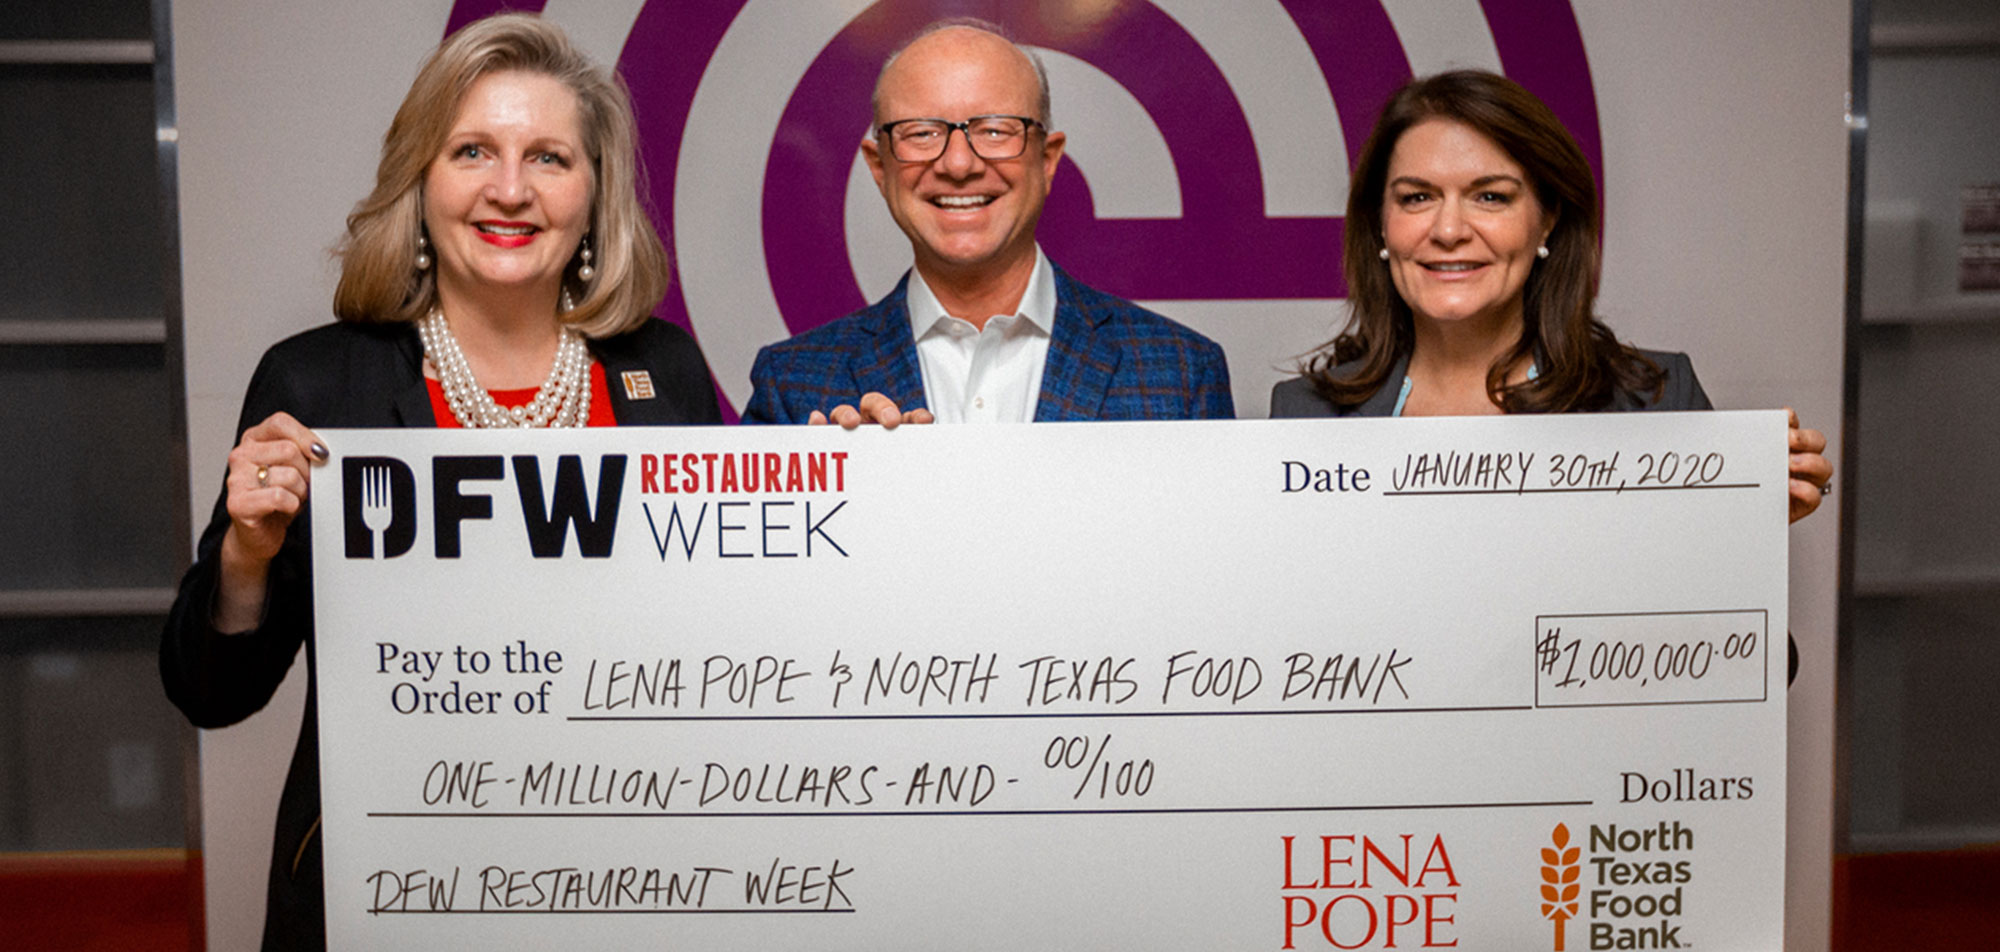 DFW Restaurant Week 2019 Results Are In! - Plano Magazine